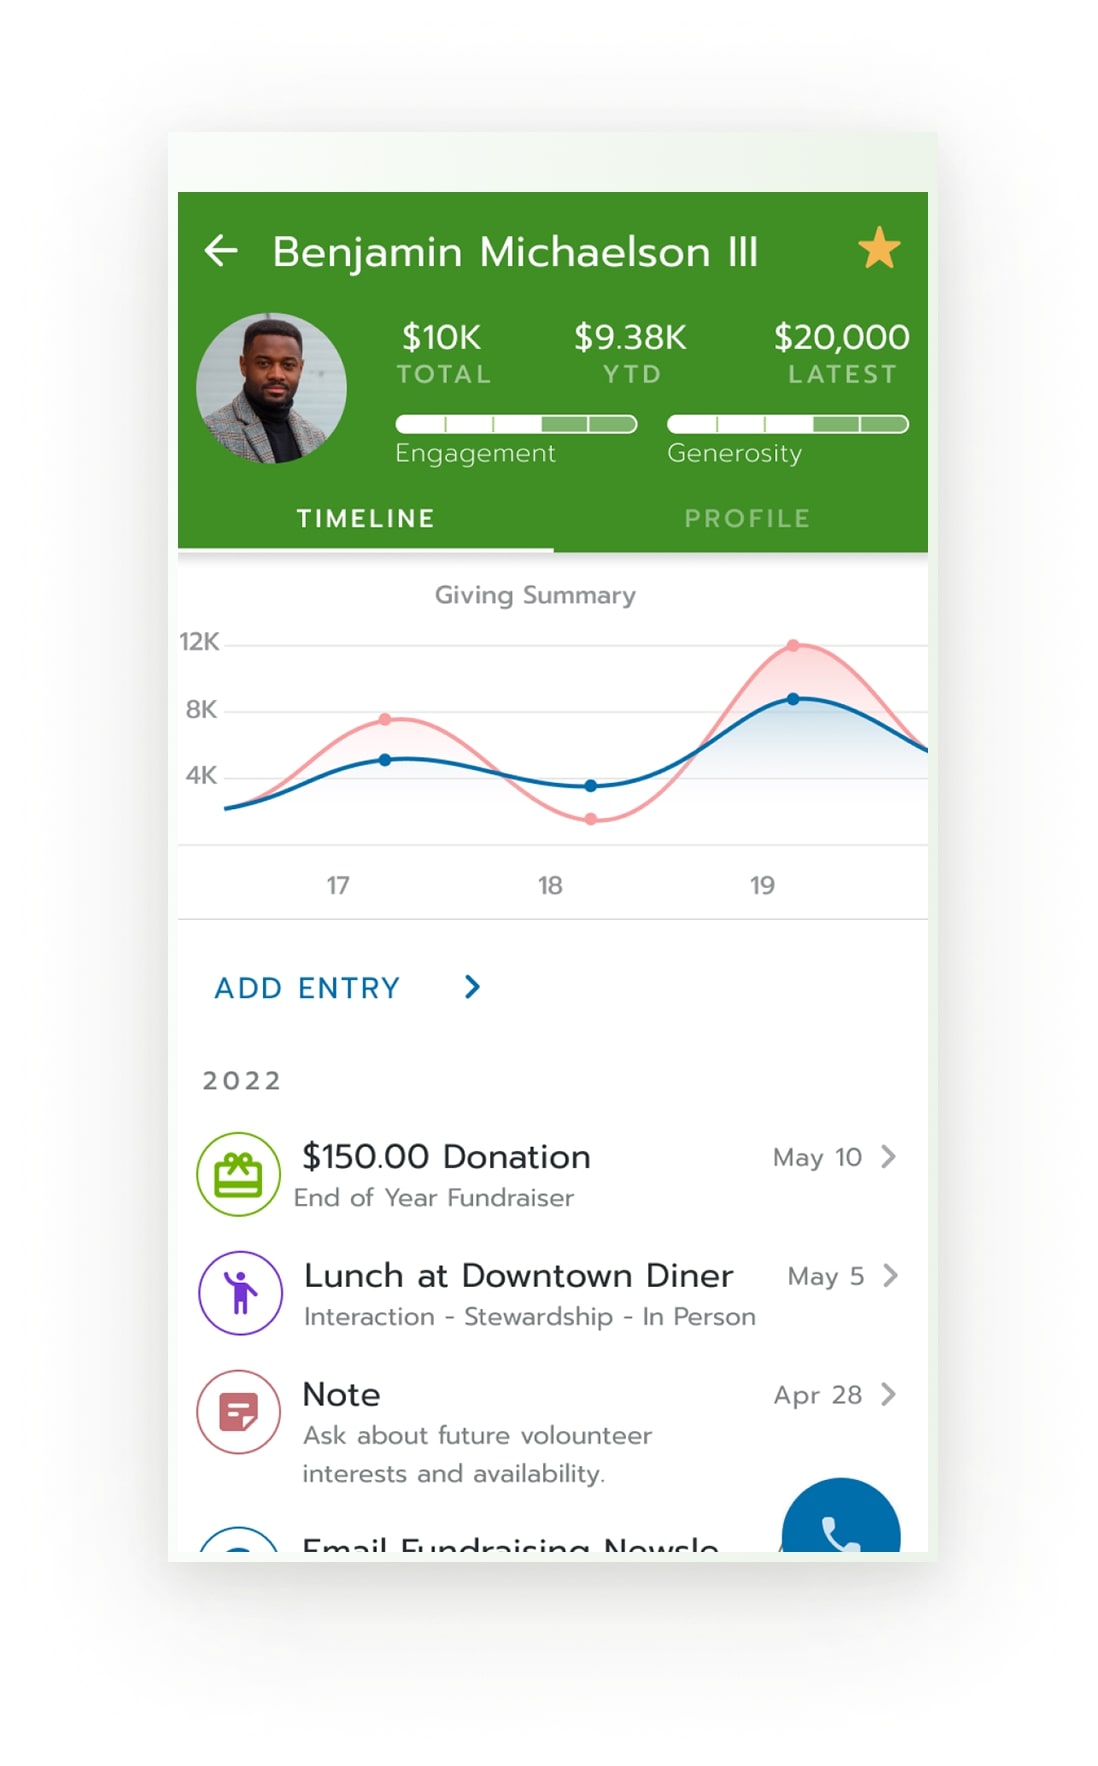 With Bloomerang's mobile donation app, you can access donor insights at your fingertips.